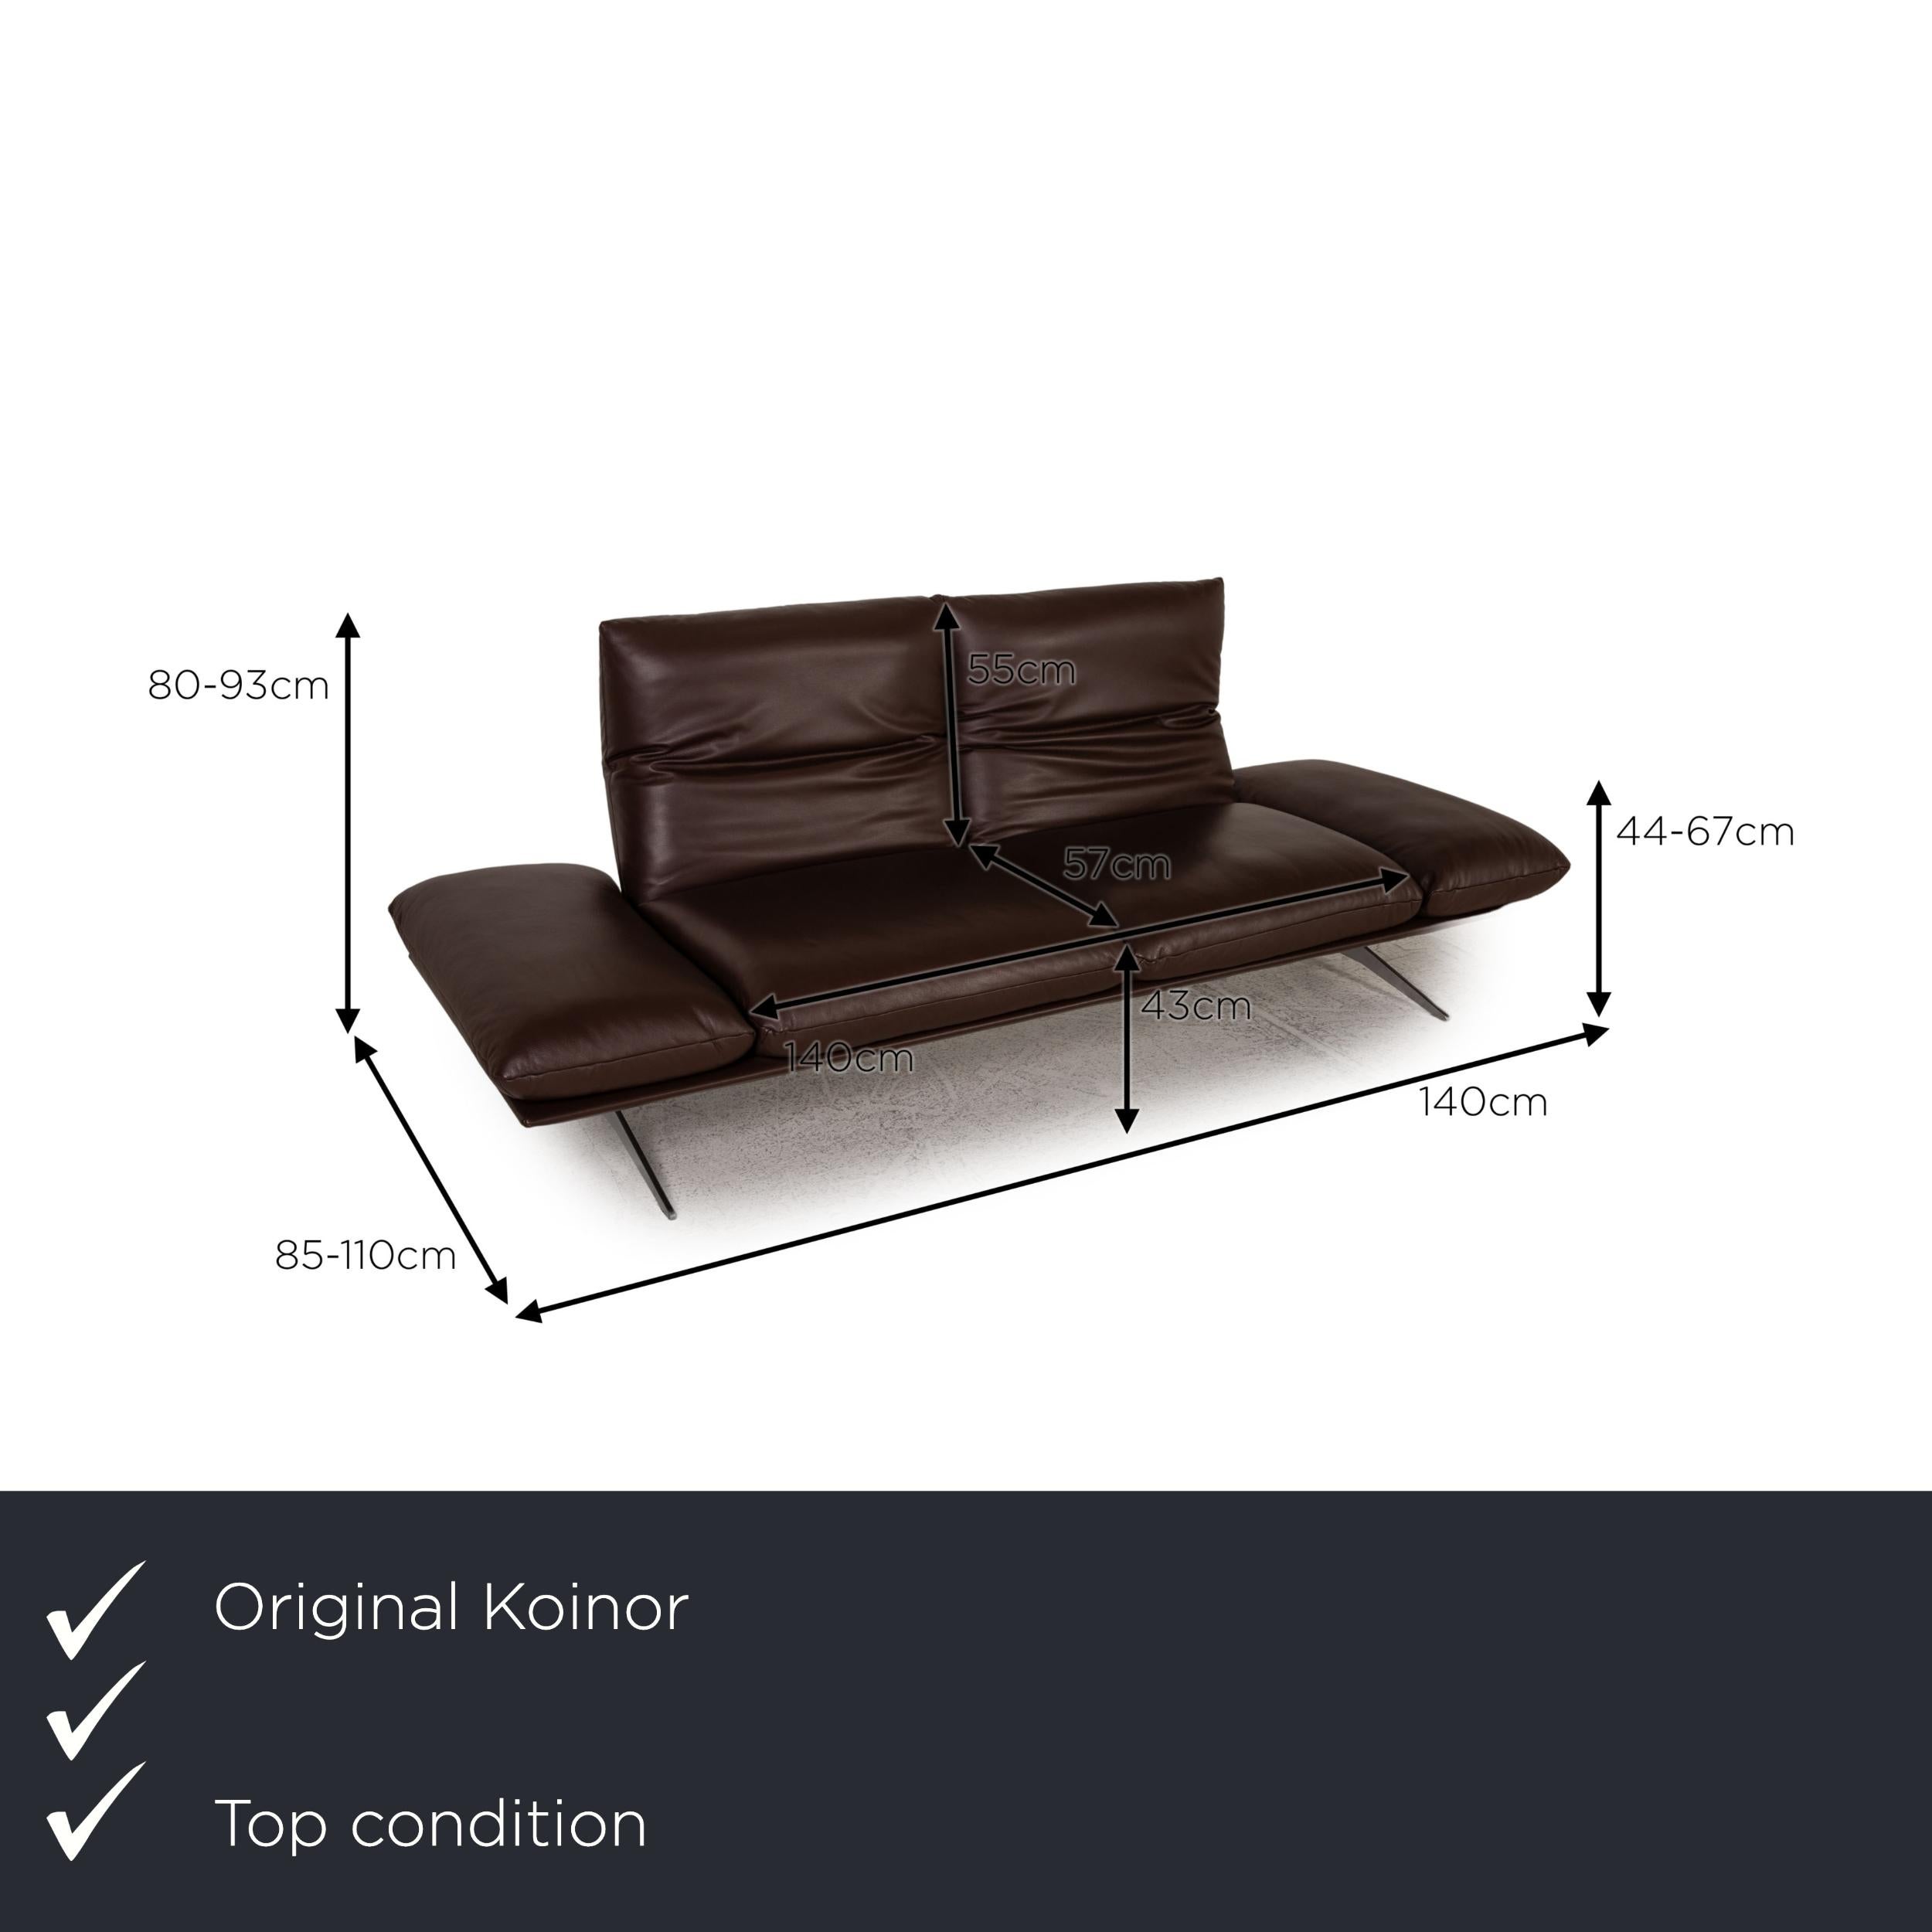 We present to you a Koinor Francis leather sofa brown three seater couch function.

Product measurements in centimeters:

depth: 85
width: 238
height: 80
seat height: 43
rest height: 44
seat depth: 57
seat width: 140
back height: 55.

 